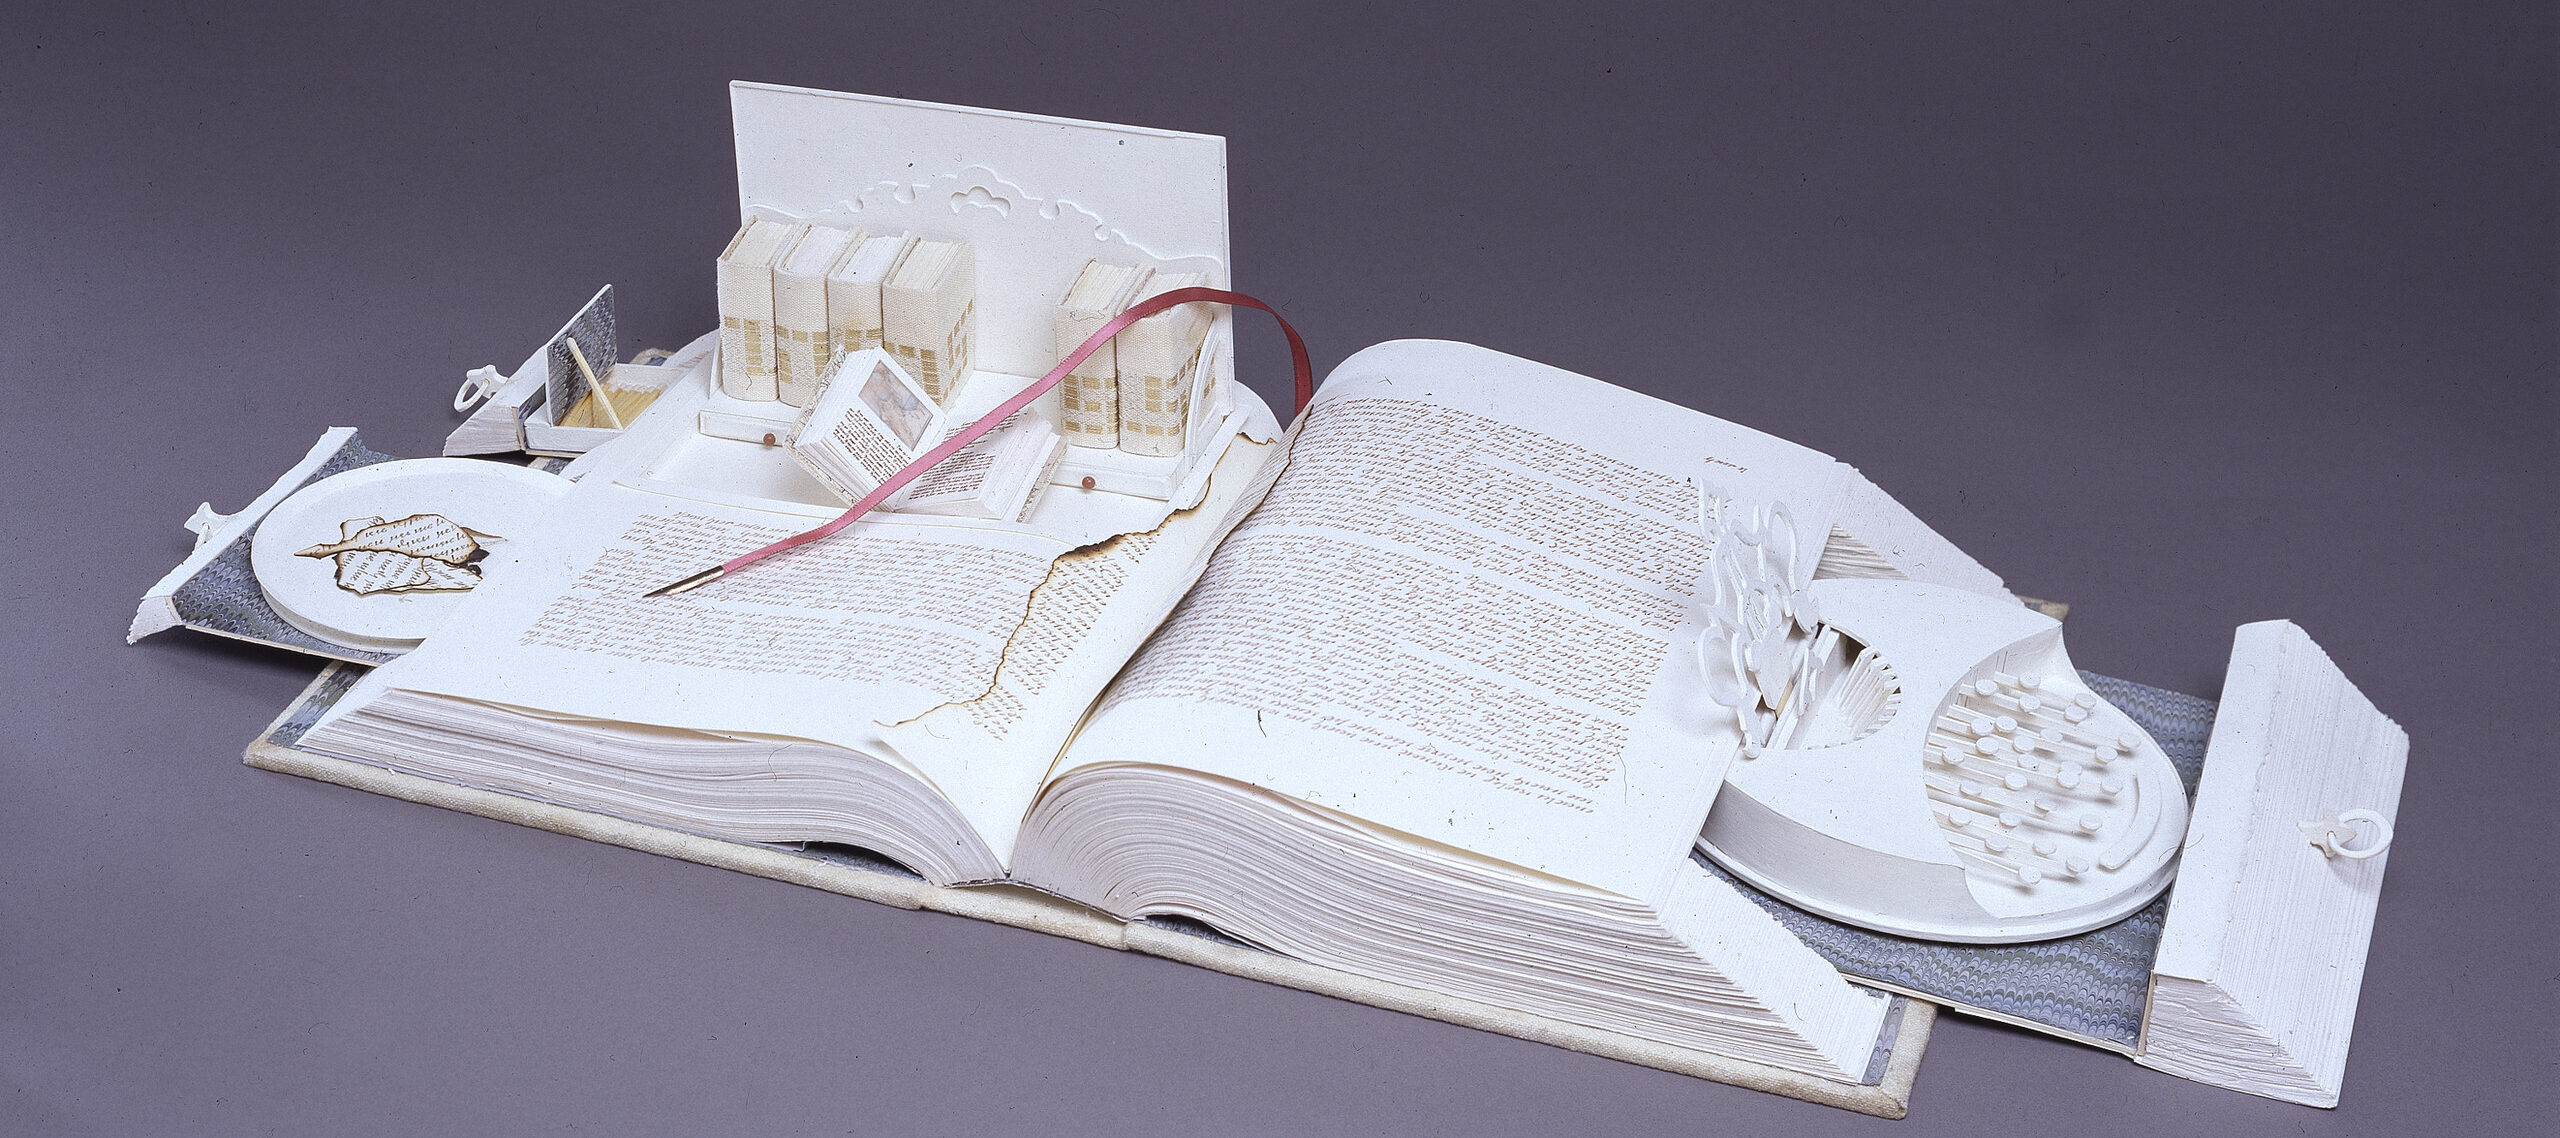 A white book opens like a Swiss army knife; its pages cut to create a sculpture. Opened to the center, pull-out drawers open from the sides, filled with paper-made objects. On the right, a typewriter-like object. On the left, a box with smaller books, including one that is also open.